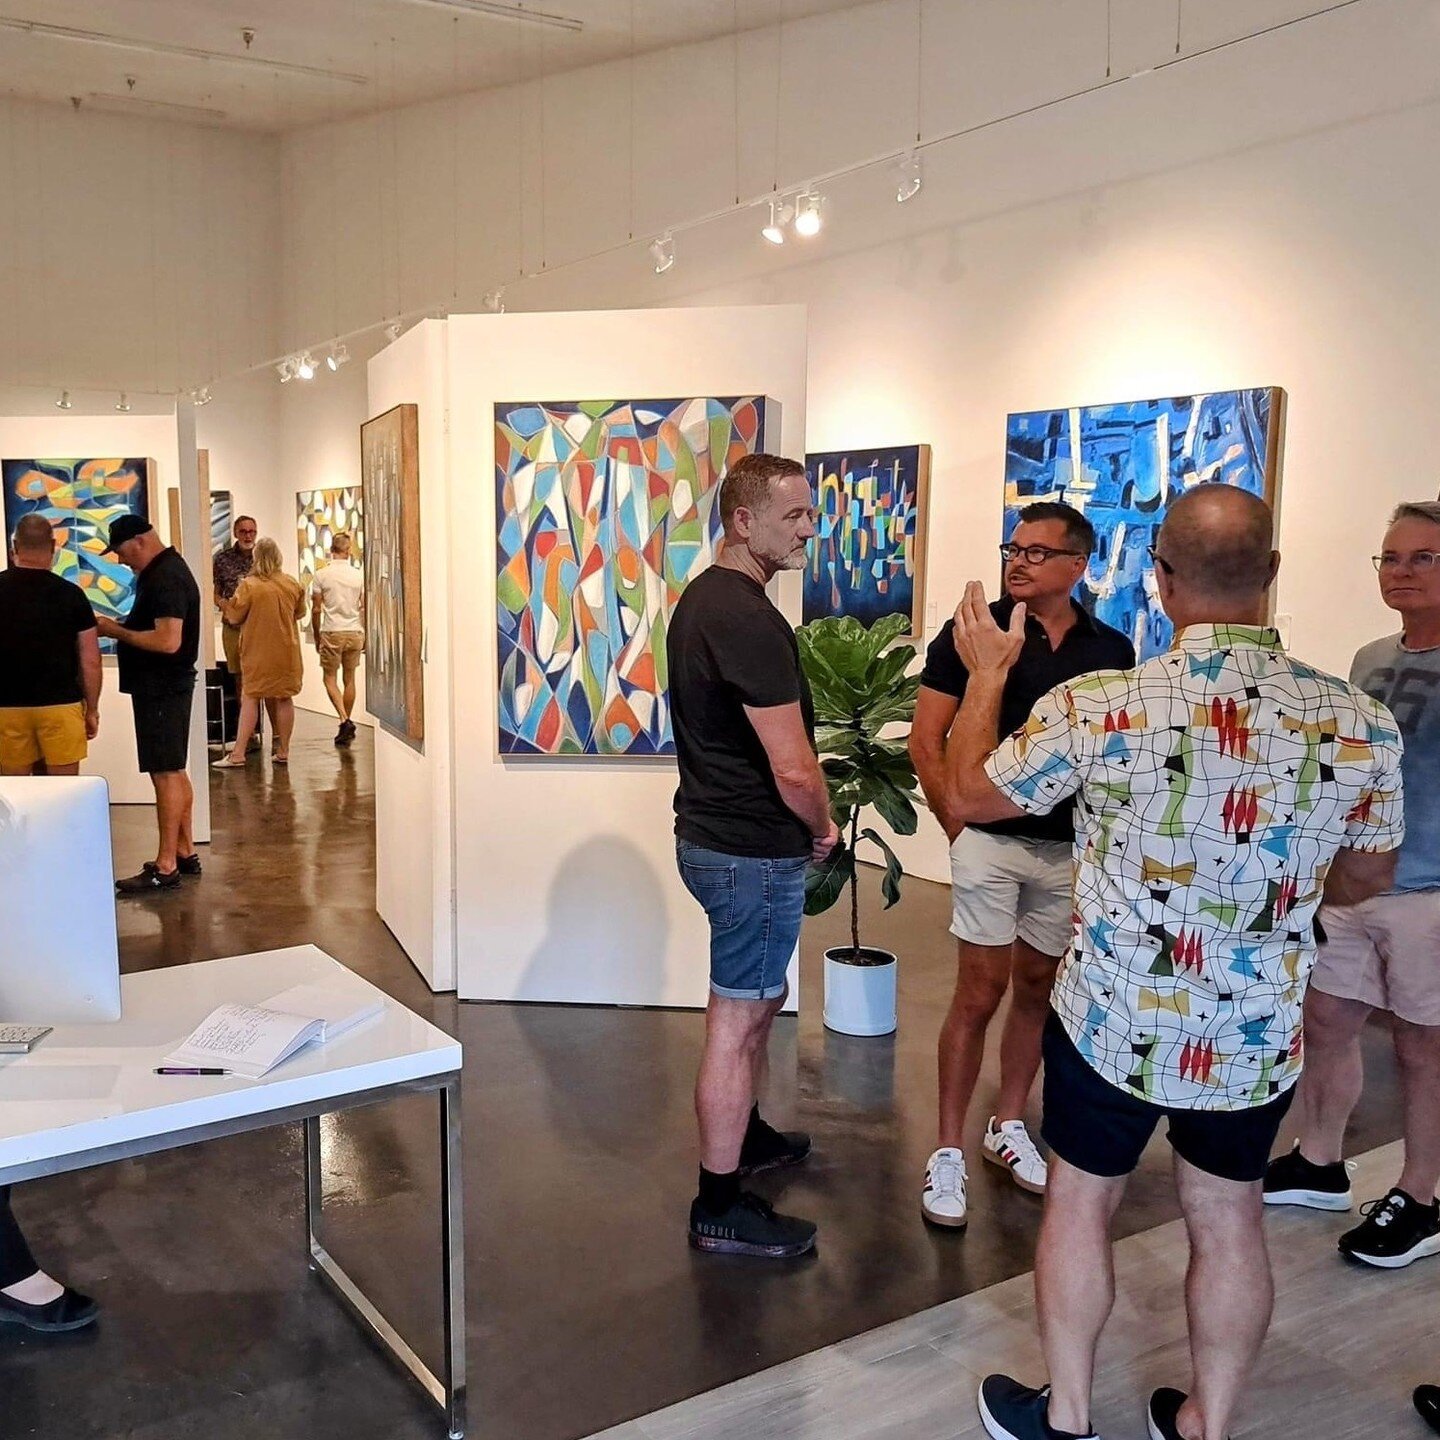 Celebrating Success and Gratitude: A Grand Opening Party to Remember

What a night to remember! I am overwhelmed with gratitude as I reflect on the incredible turnout and support we received at the Grand Opening Party for my new gallery location. It 